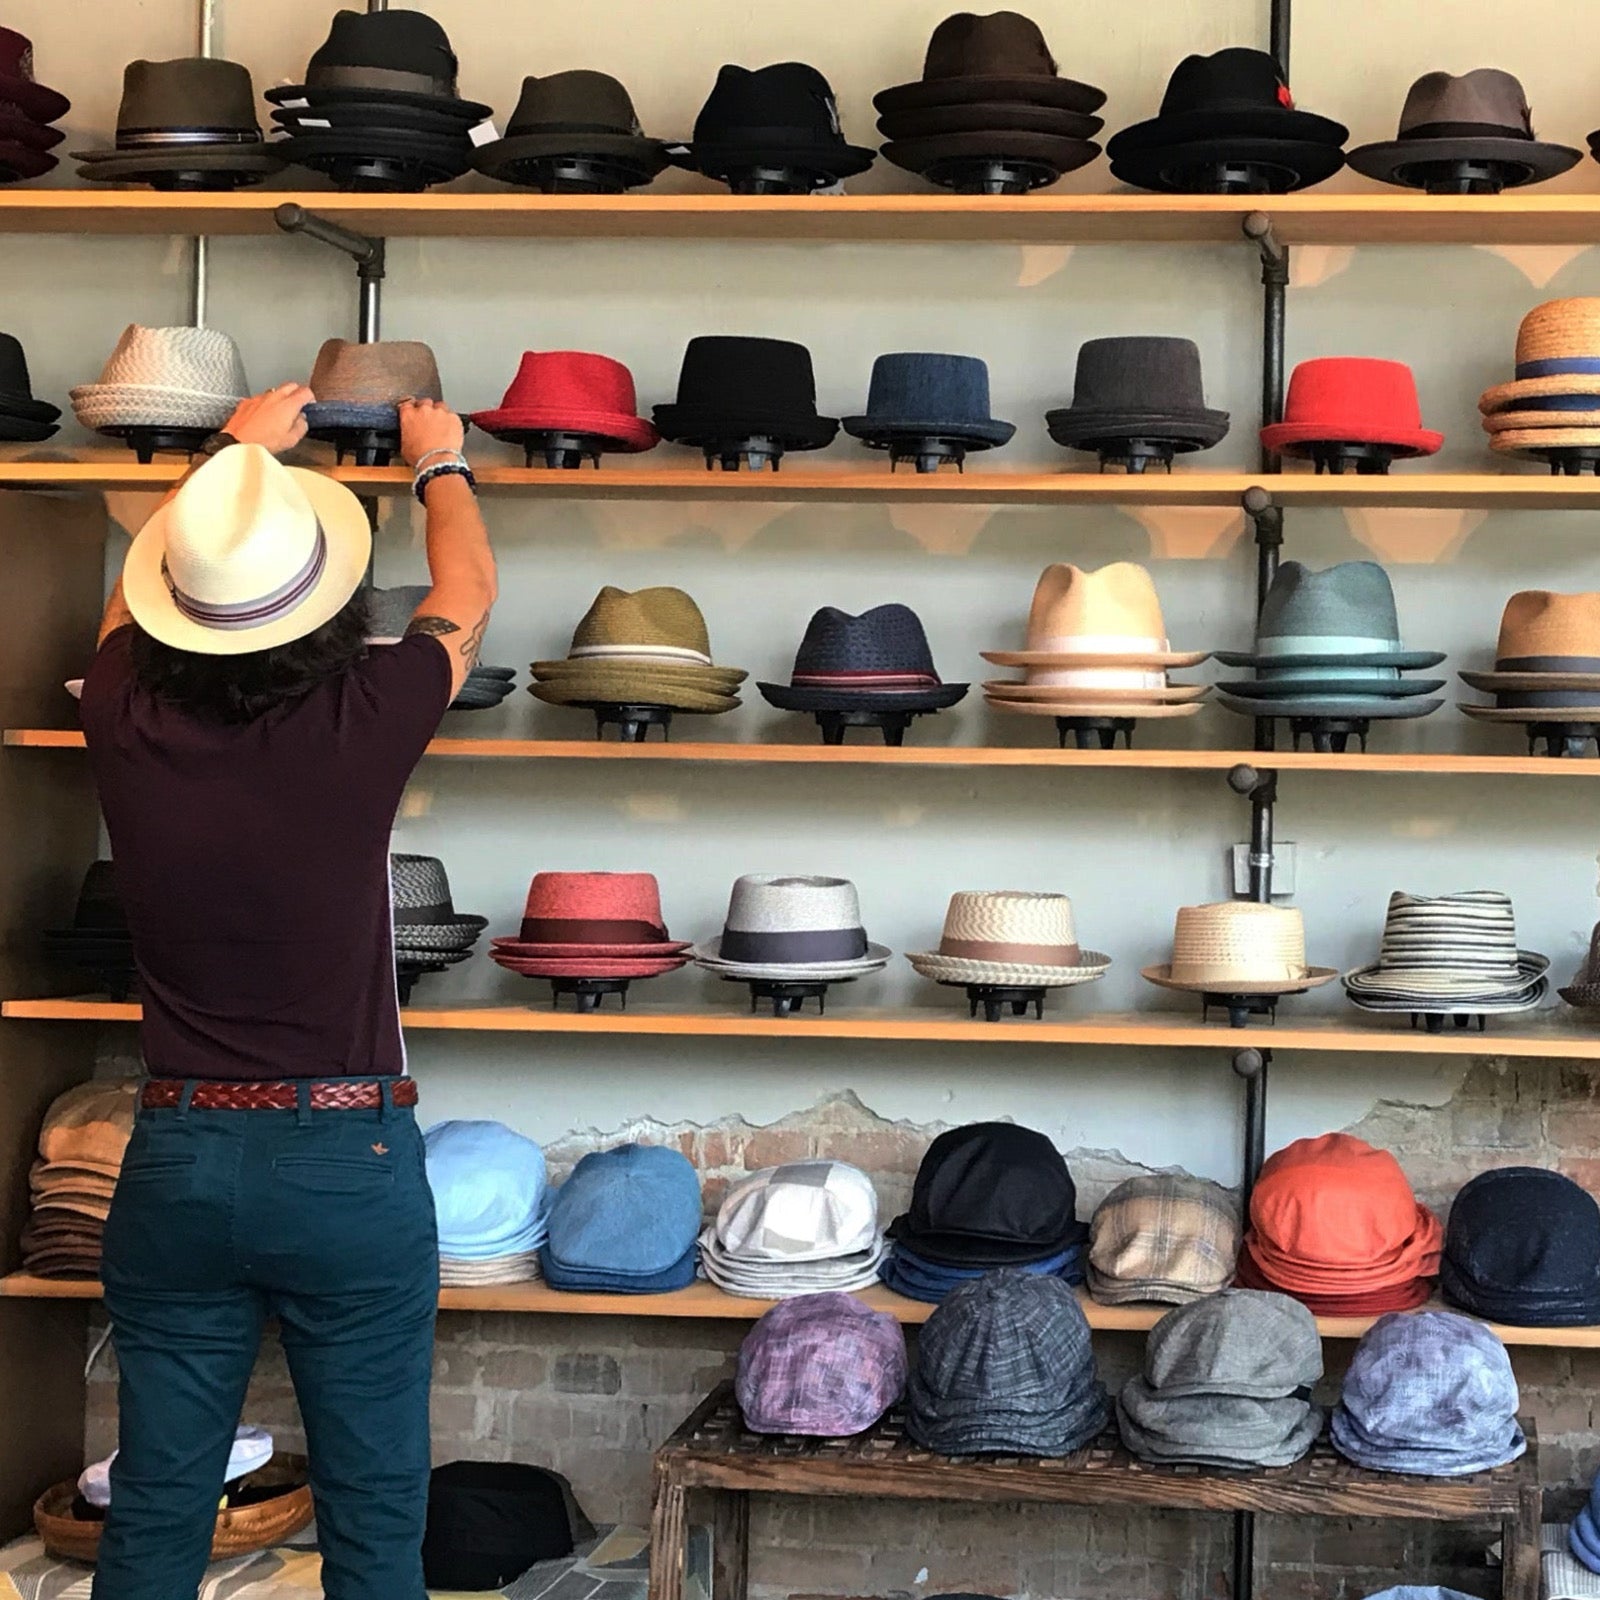 All Hats